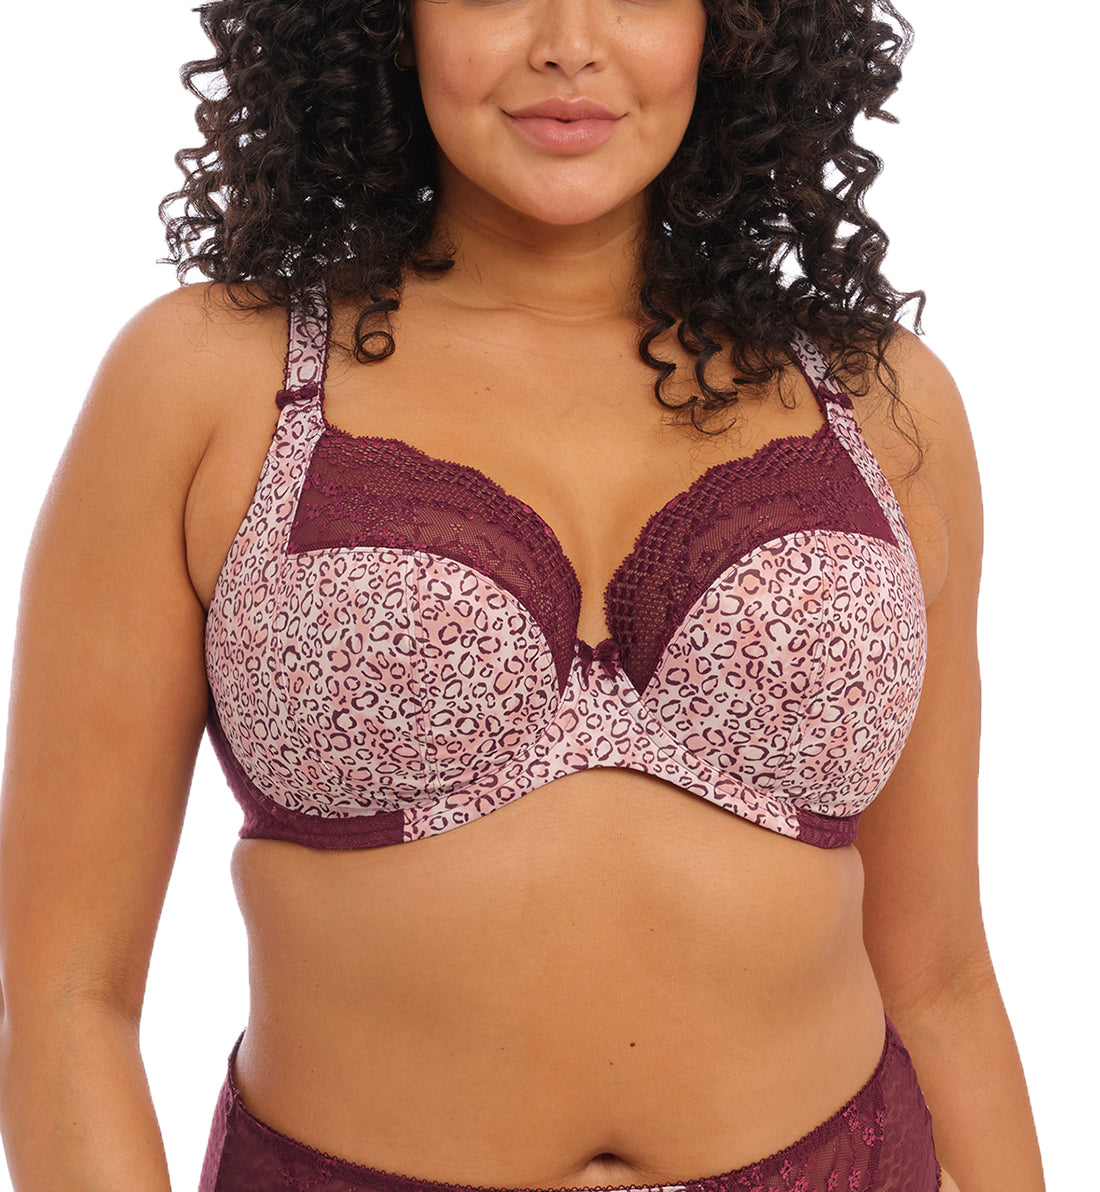 Elomi Lucie Banded Stretch Lace Plunge Underwire Bra (4490),32GG,Wild Thing - Wild Thing,32GG